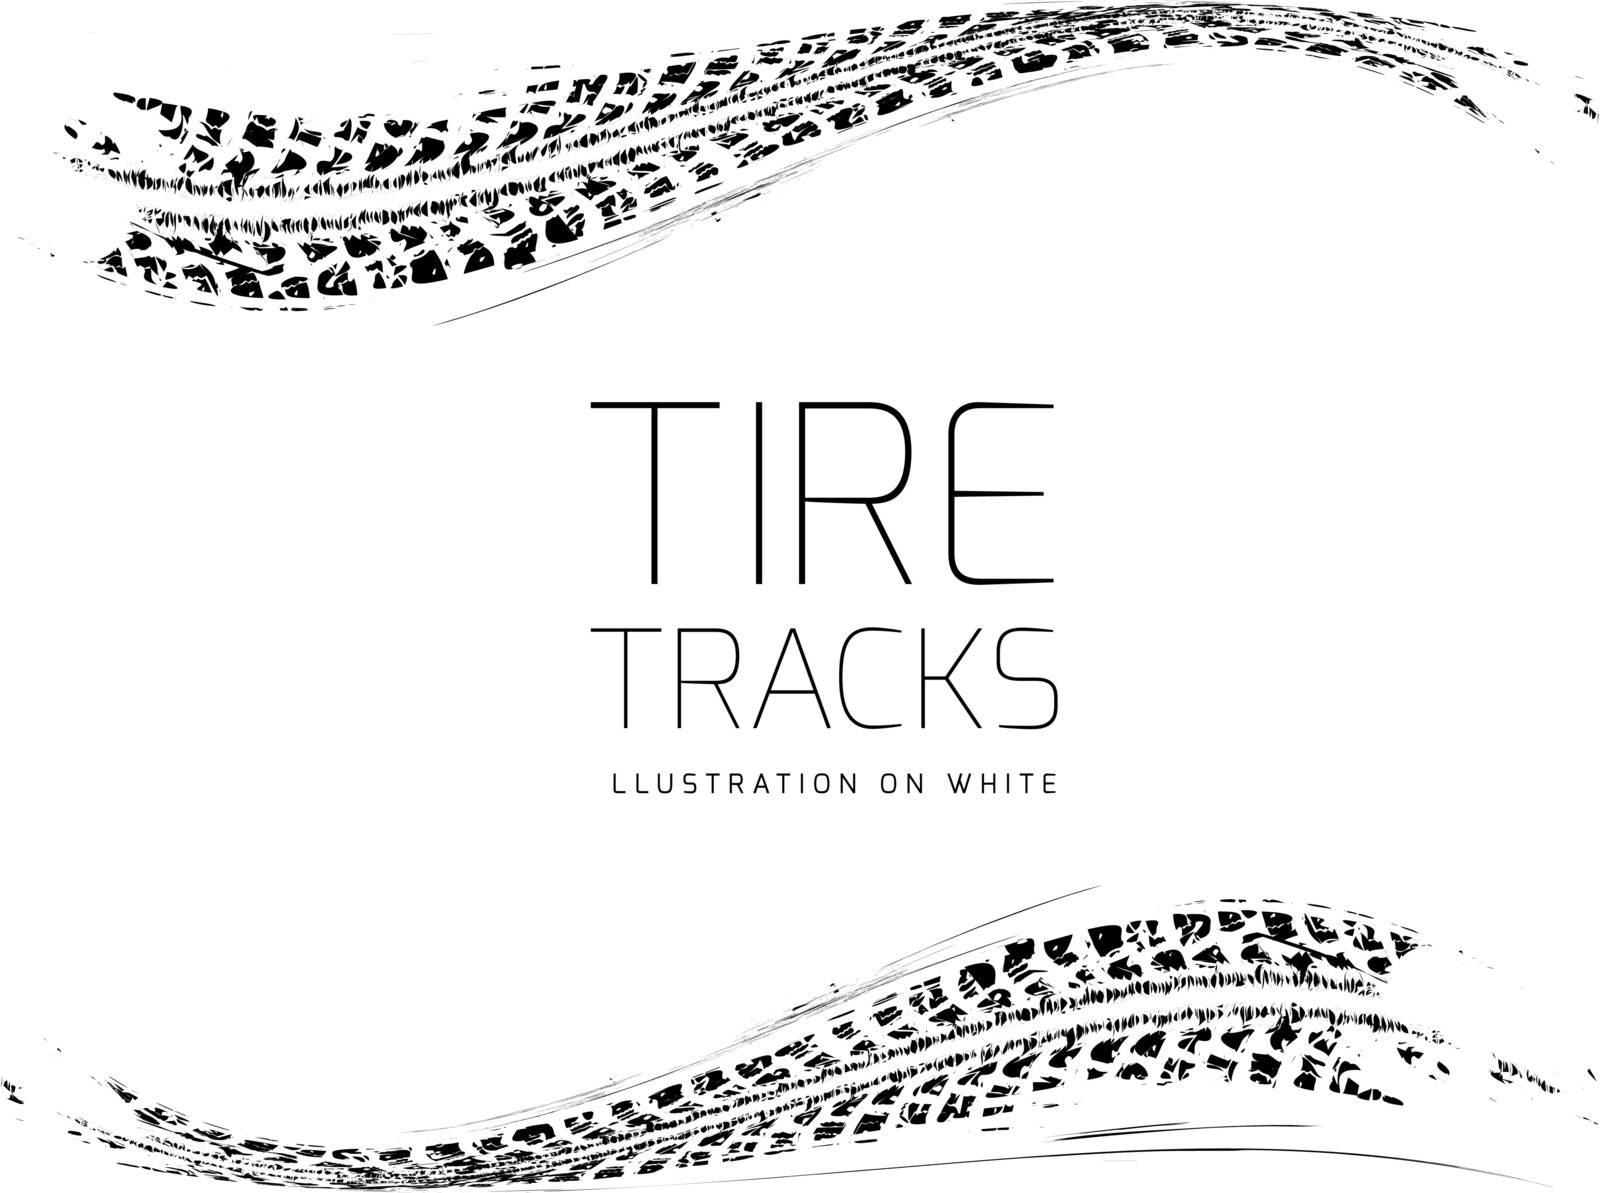 Tire tracks background by sermax55